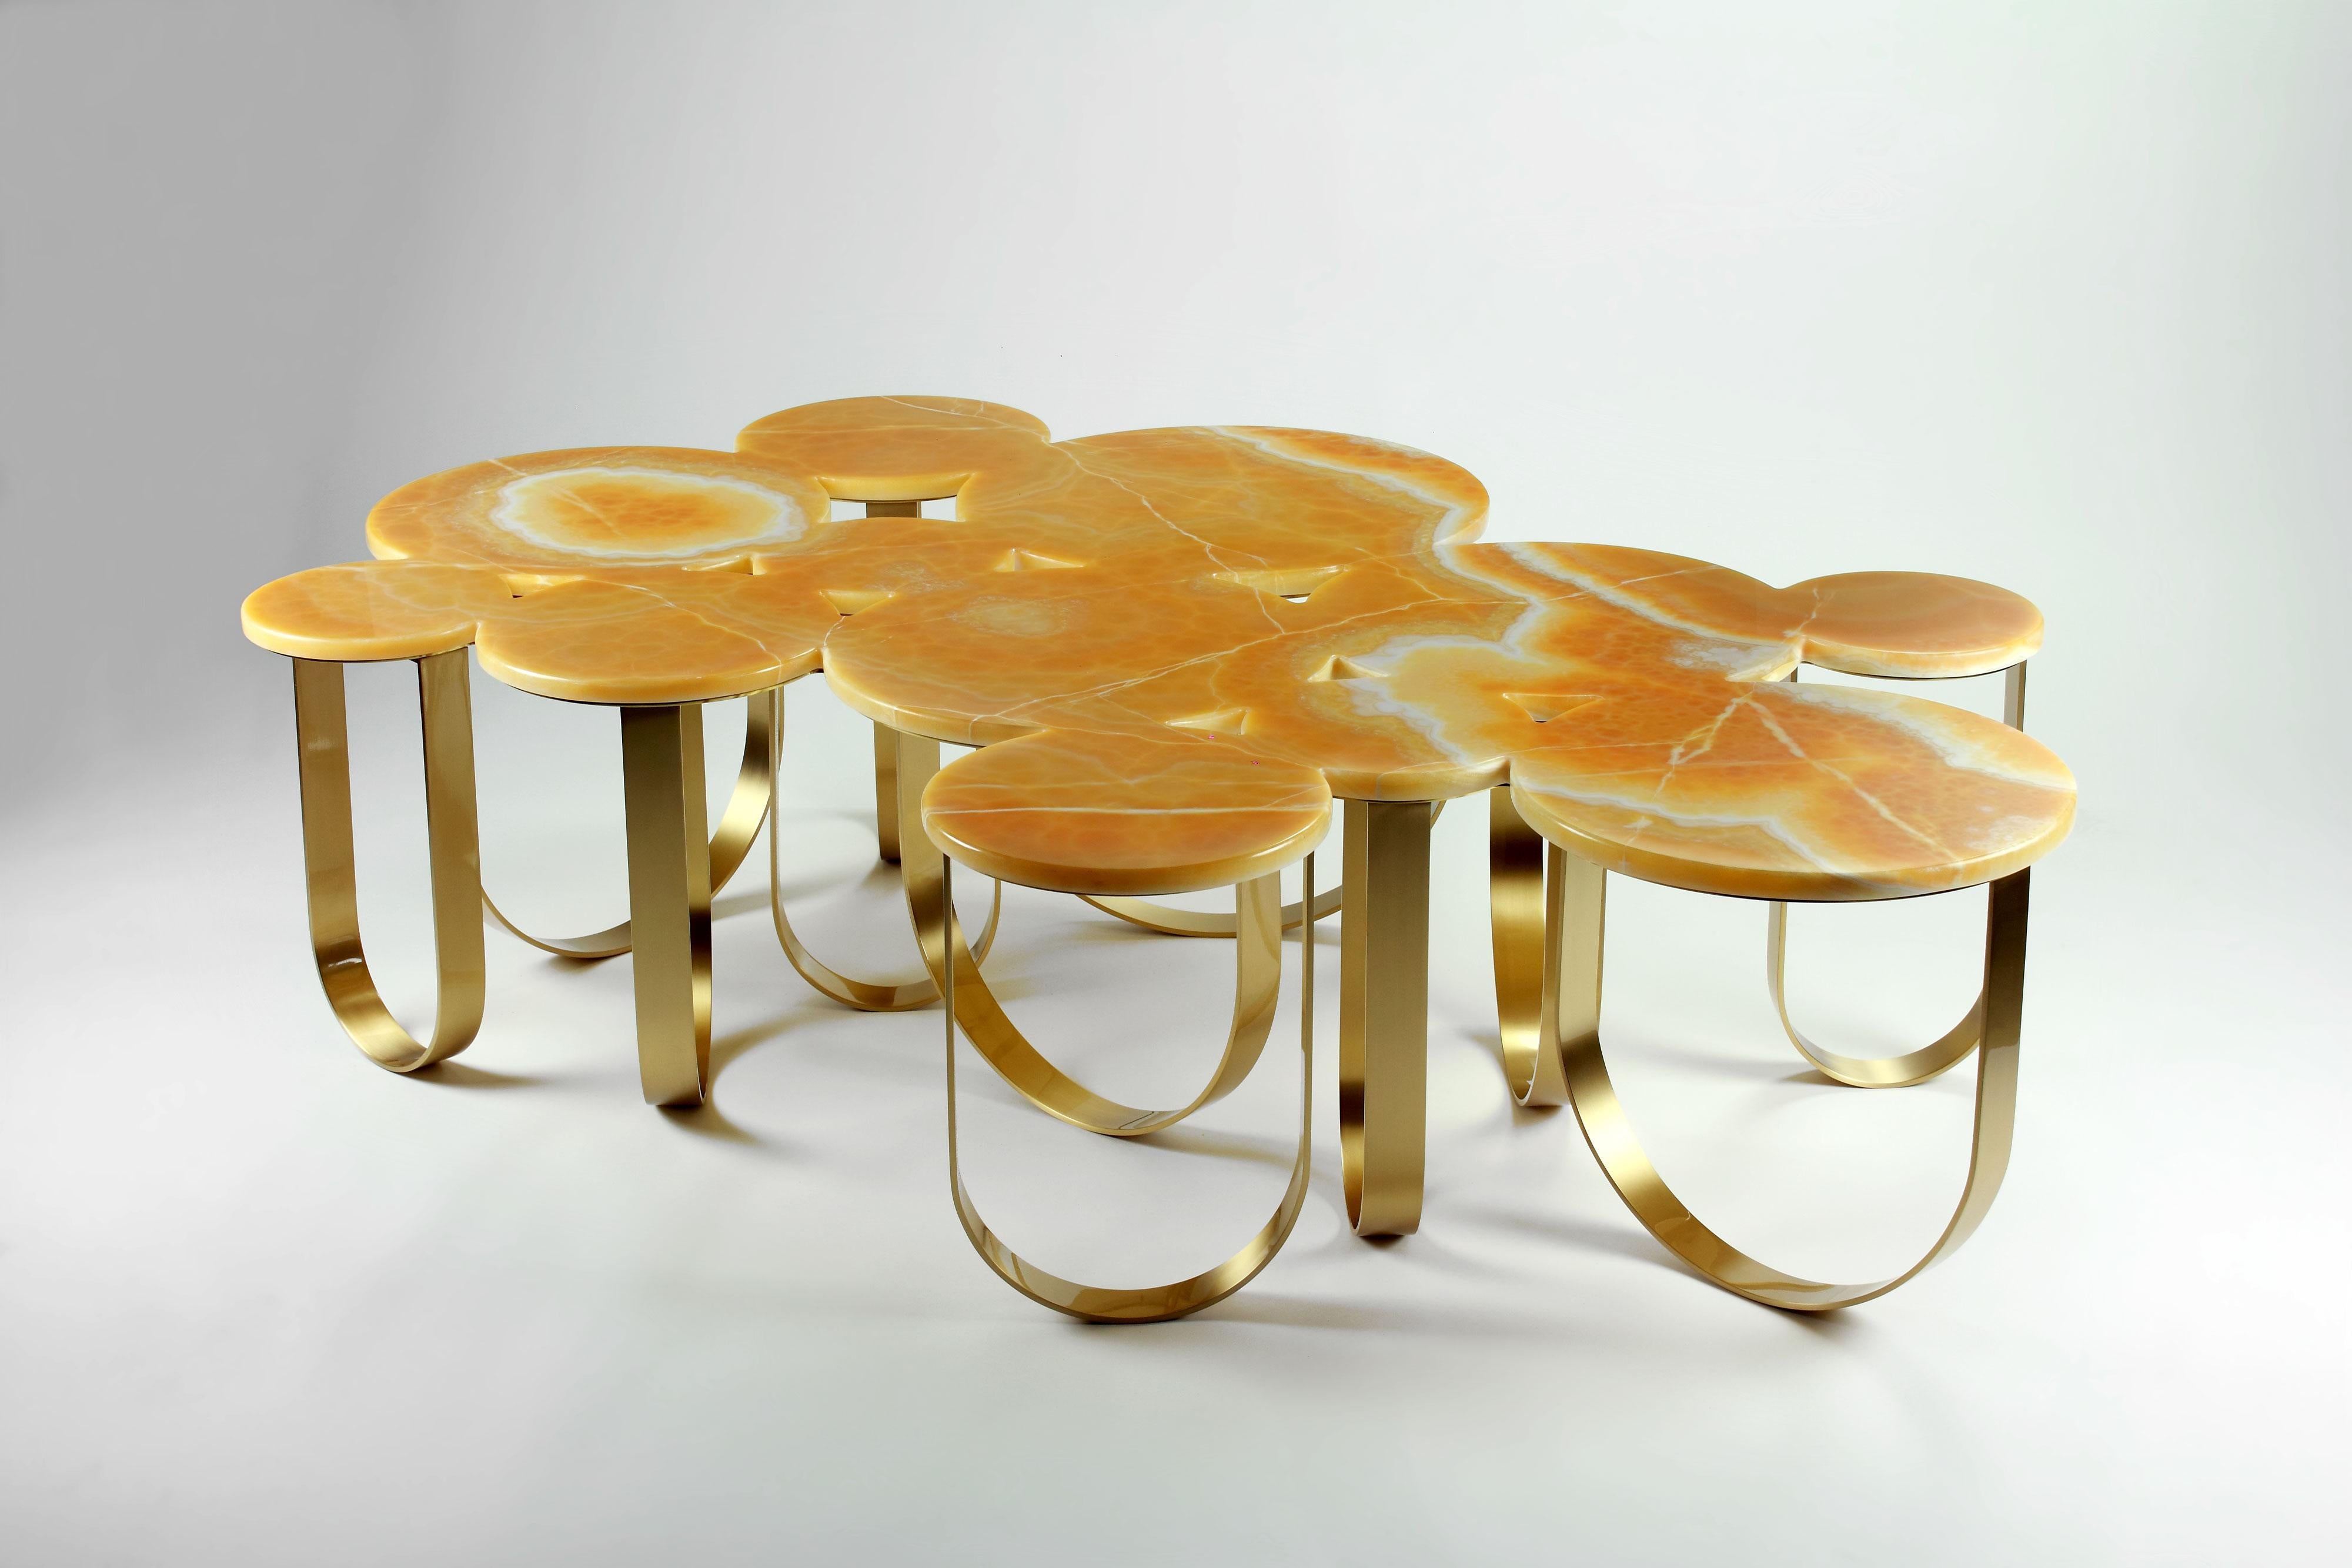 The 'Cloud' is a spectacular coffee table with structure in brushed brass and top in orange onyx. The brushed finishing of the brass creates interesting reflections of light. 

This artwork is available as a one piece and three pieces coffee table.